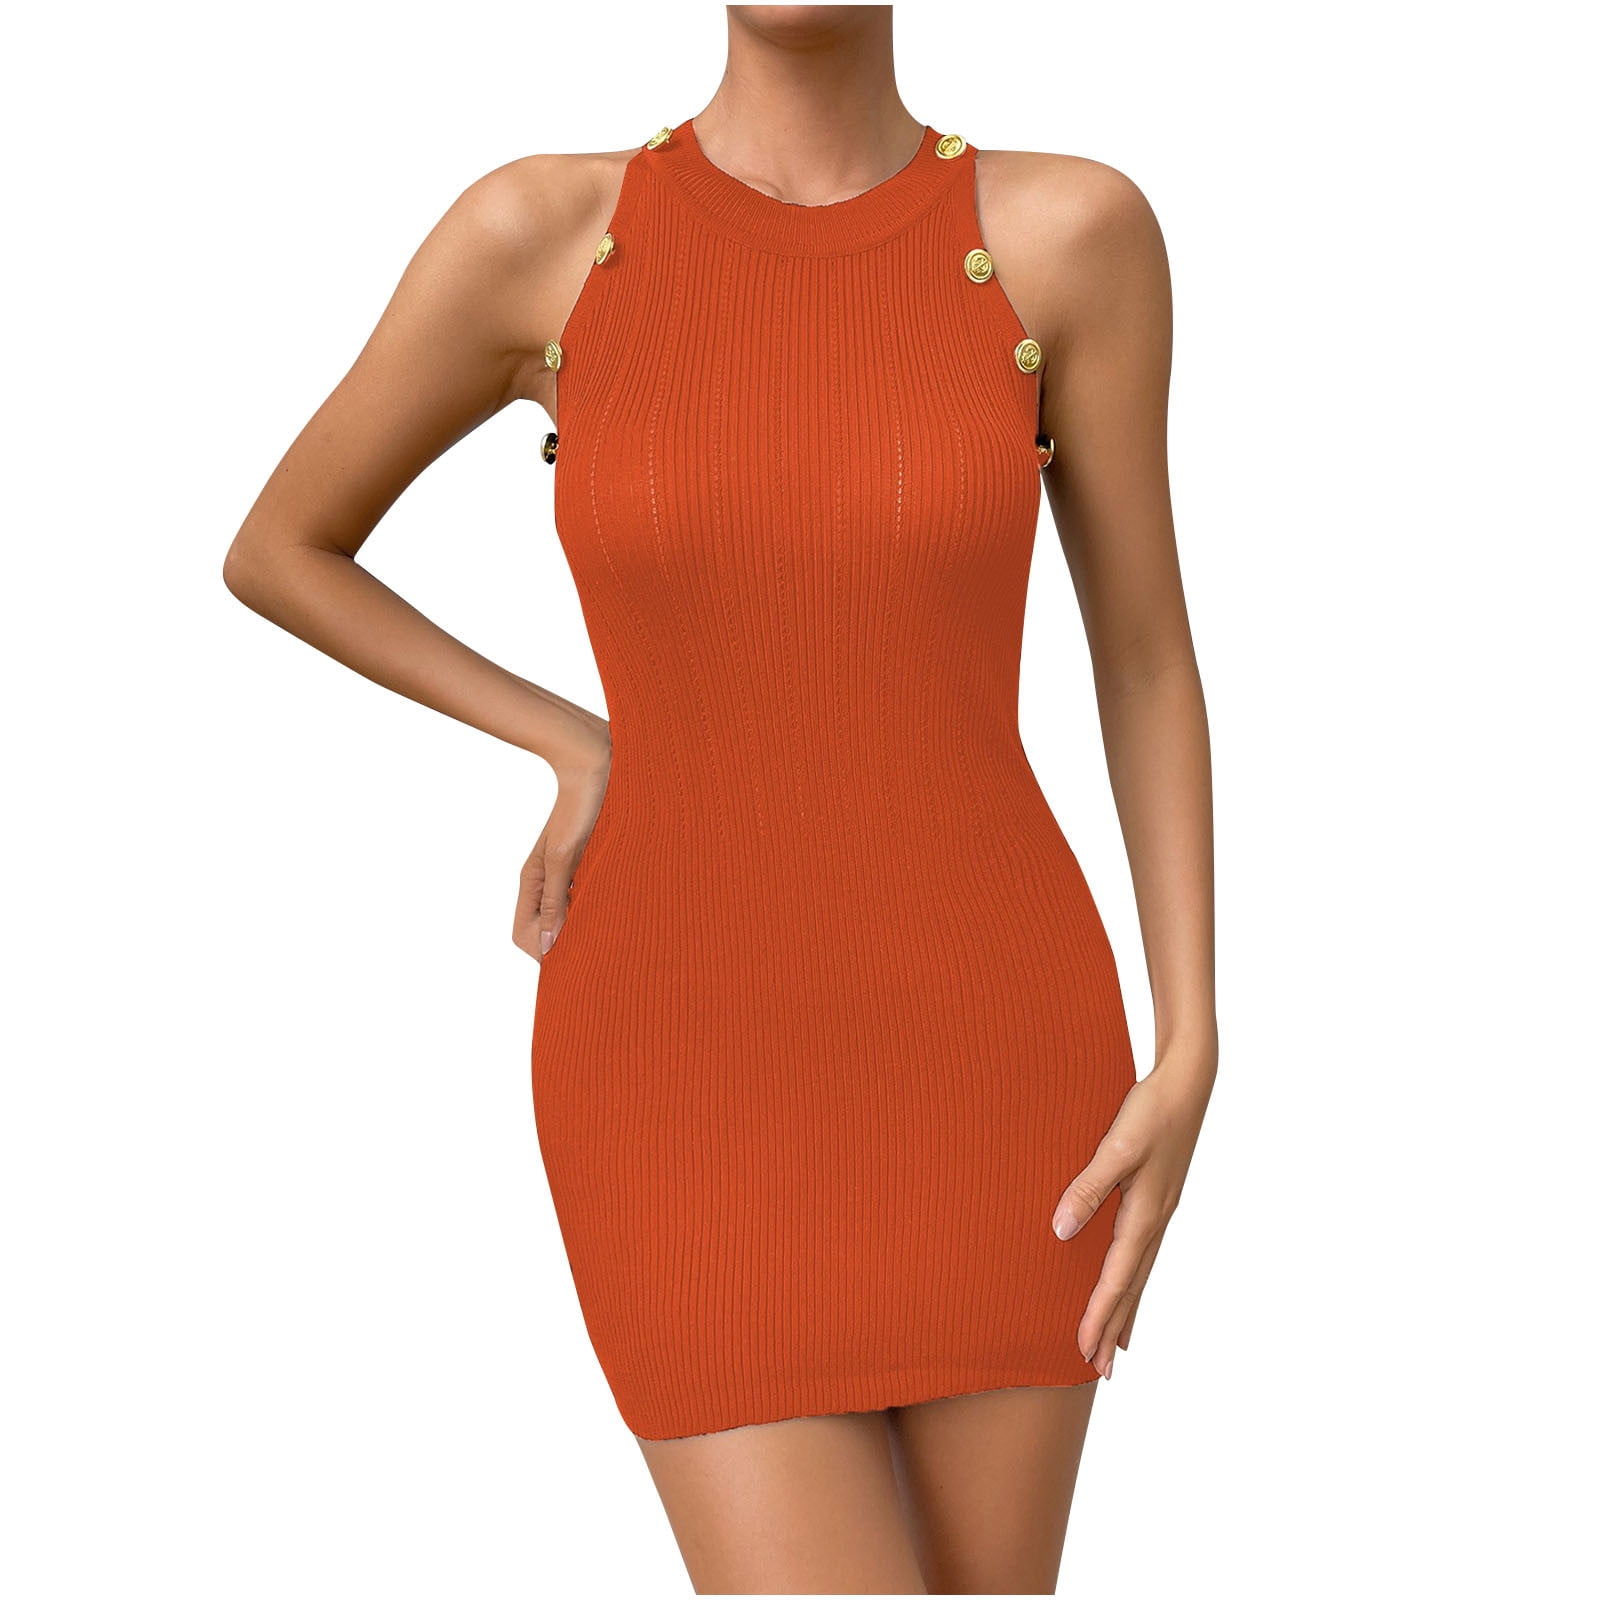 Wycnly Dresses for Women Party Club Knitted Cotton Sexy Bodycon